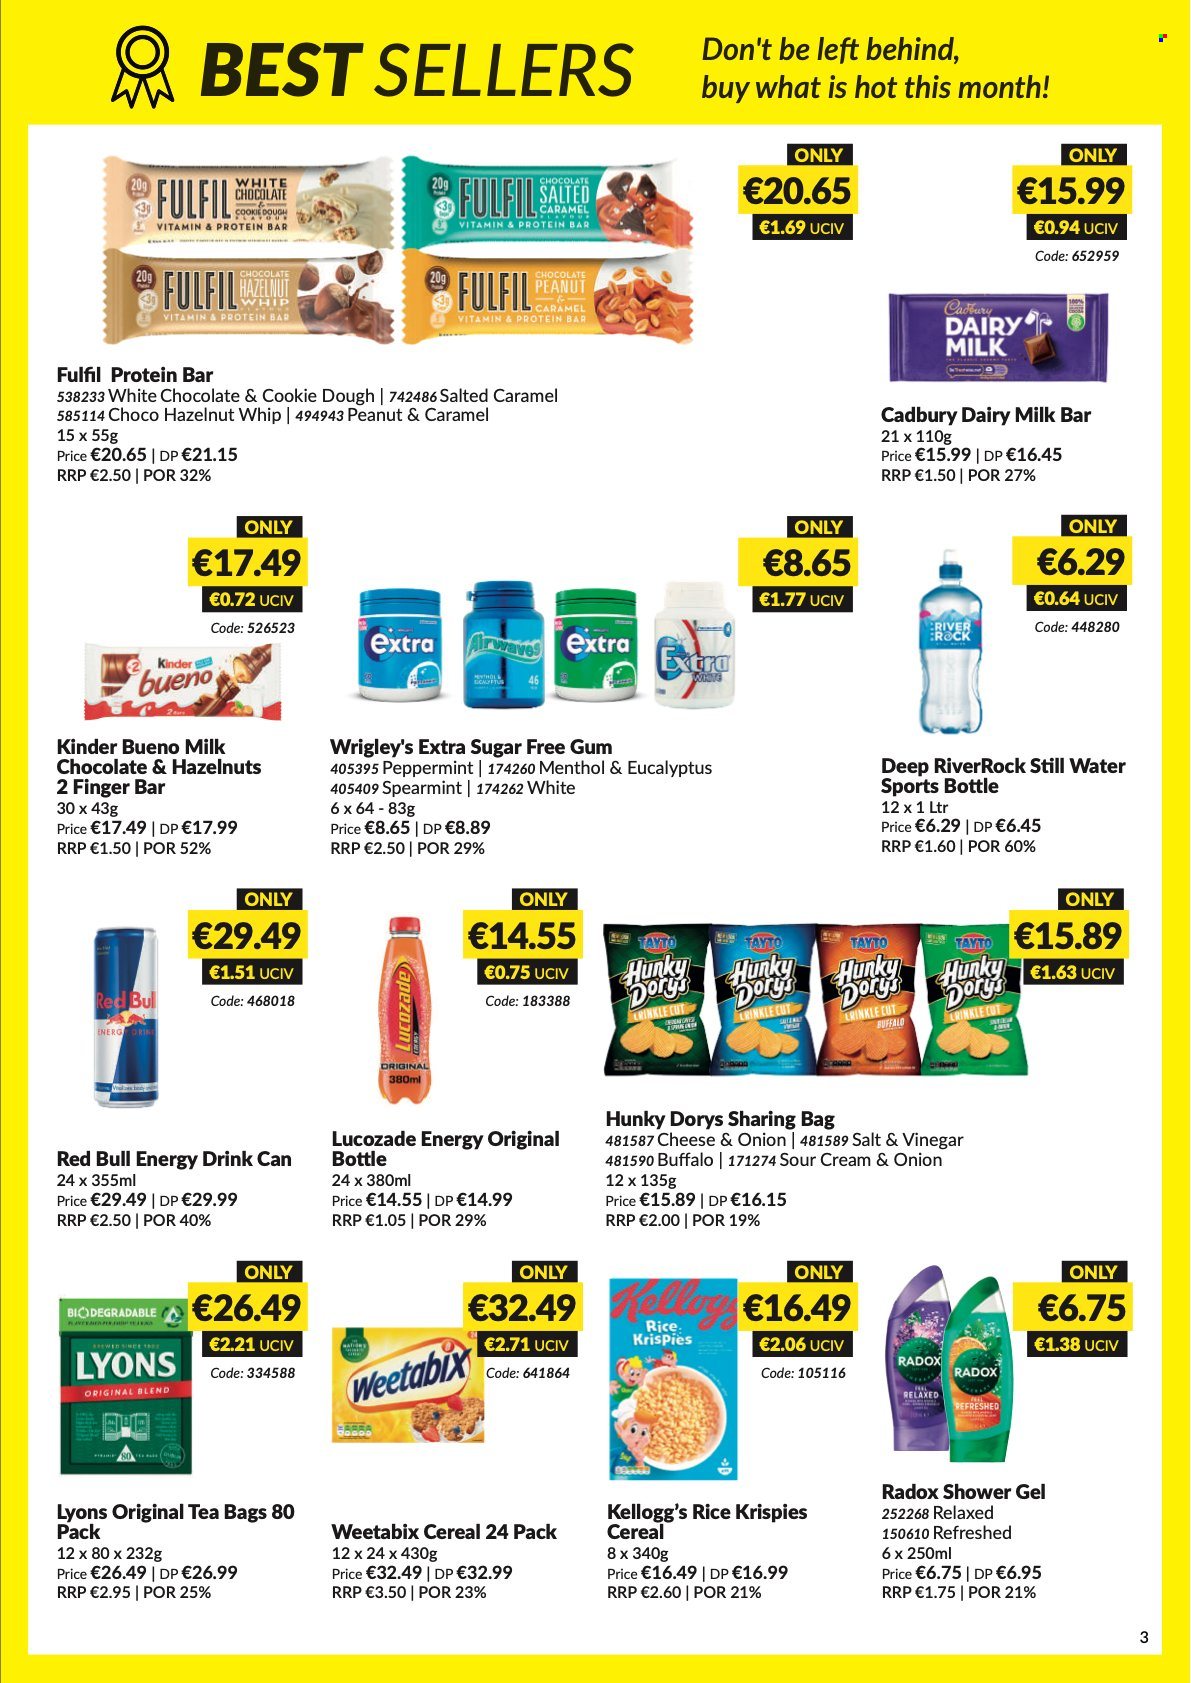 thumbnail - MUSGRAVE Market Place offer  - 08.05.2022 - 04.06.2022 - Sales products - cookie dough, milk chocolate, chocolate, Kellogg's, Kinder Bueno, Cadbury, Dairy Milk, Tayto, cereals, protein bar, Rice Krispies, Weetabix, vinegar, energy drink, Red Bull, Lucozade, mineral water, bottled water, tea bags, Lyons, shower gel, Radox, travel bottle. Page 3.